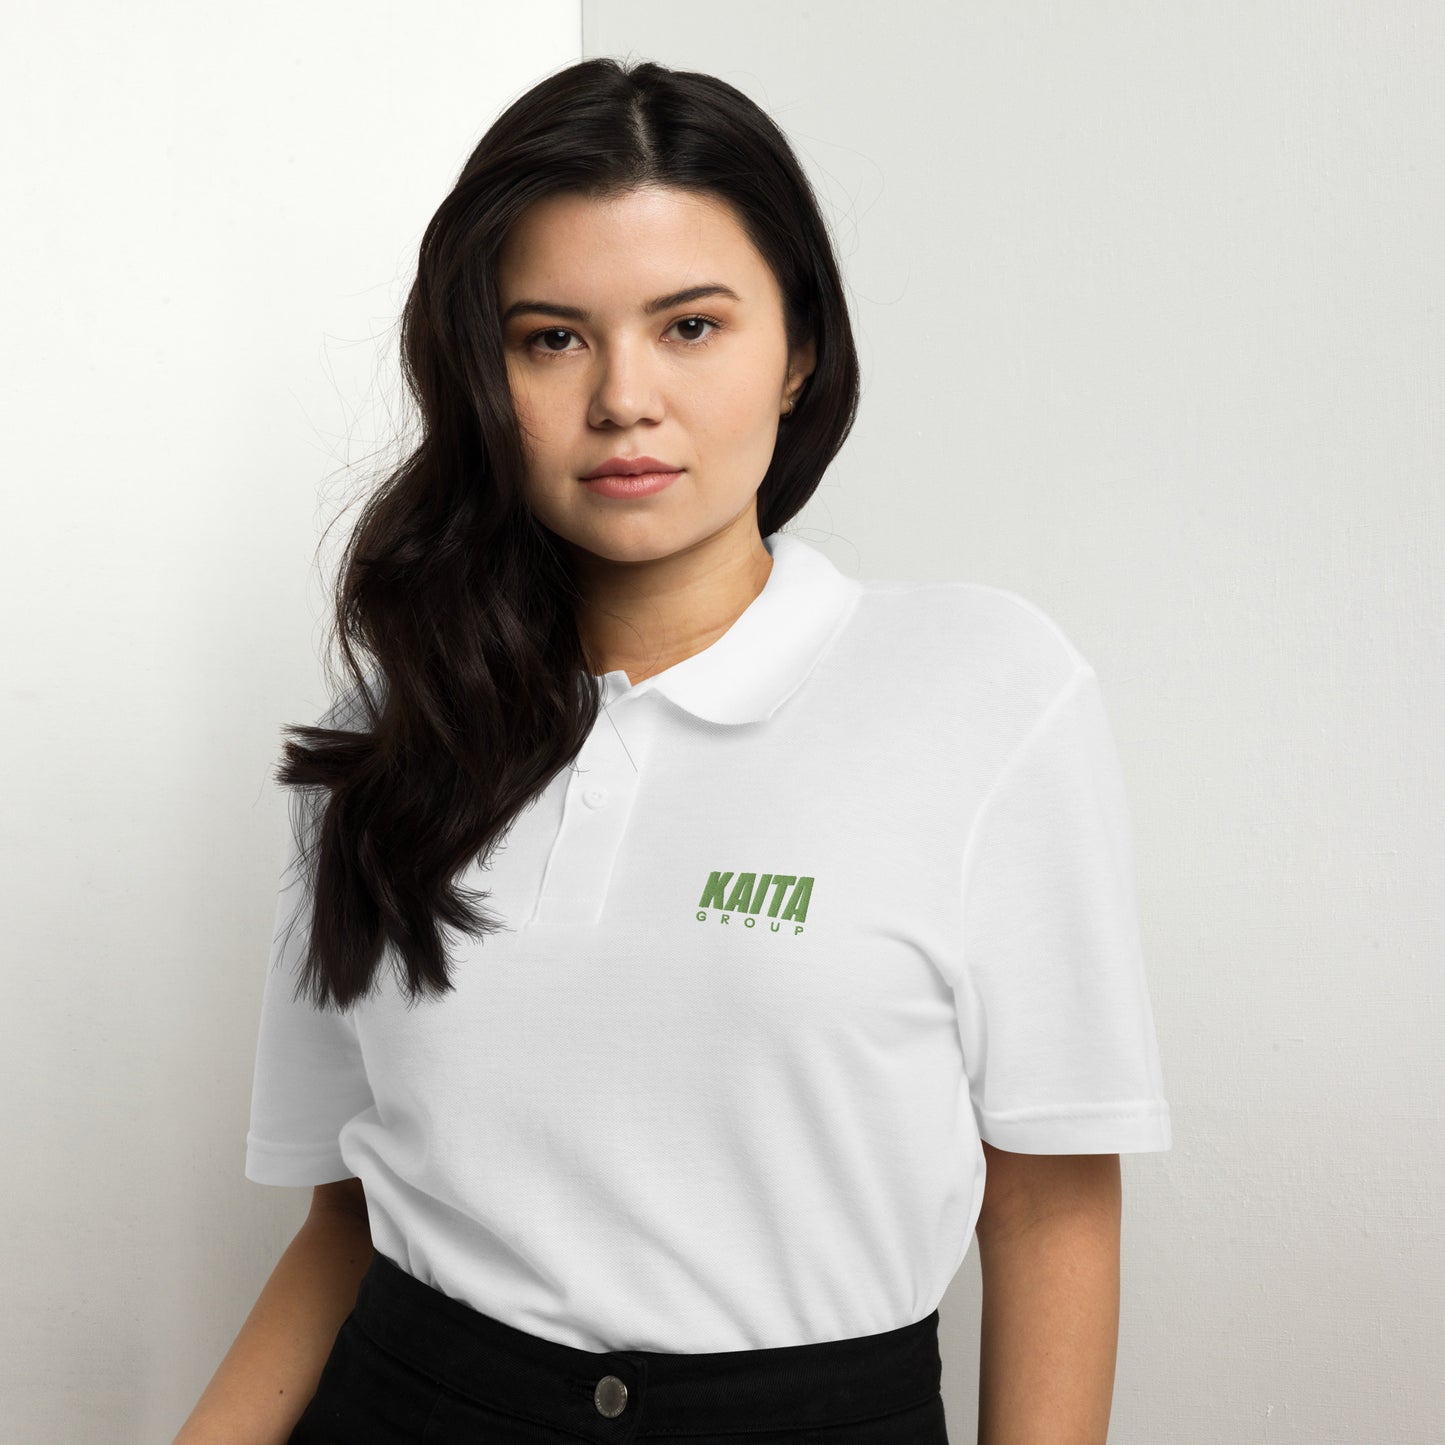 Corporate polo shirt (embroidery of your logo)